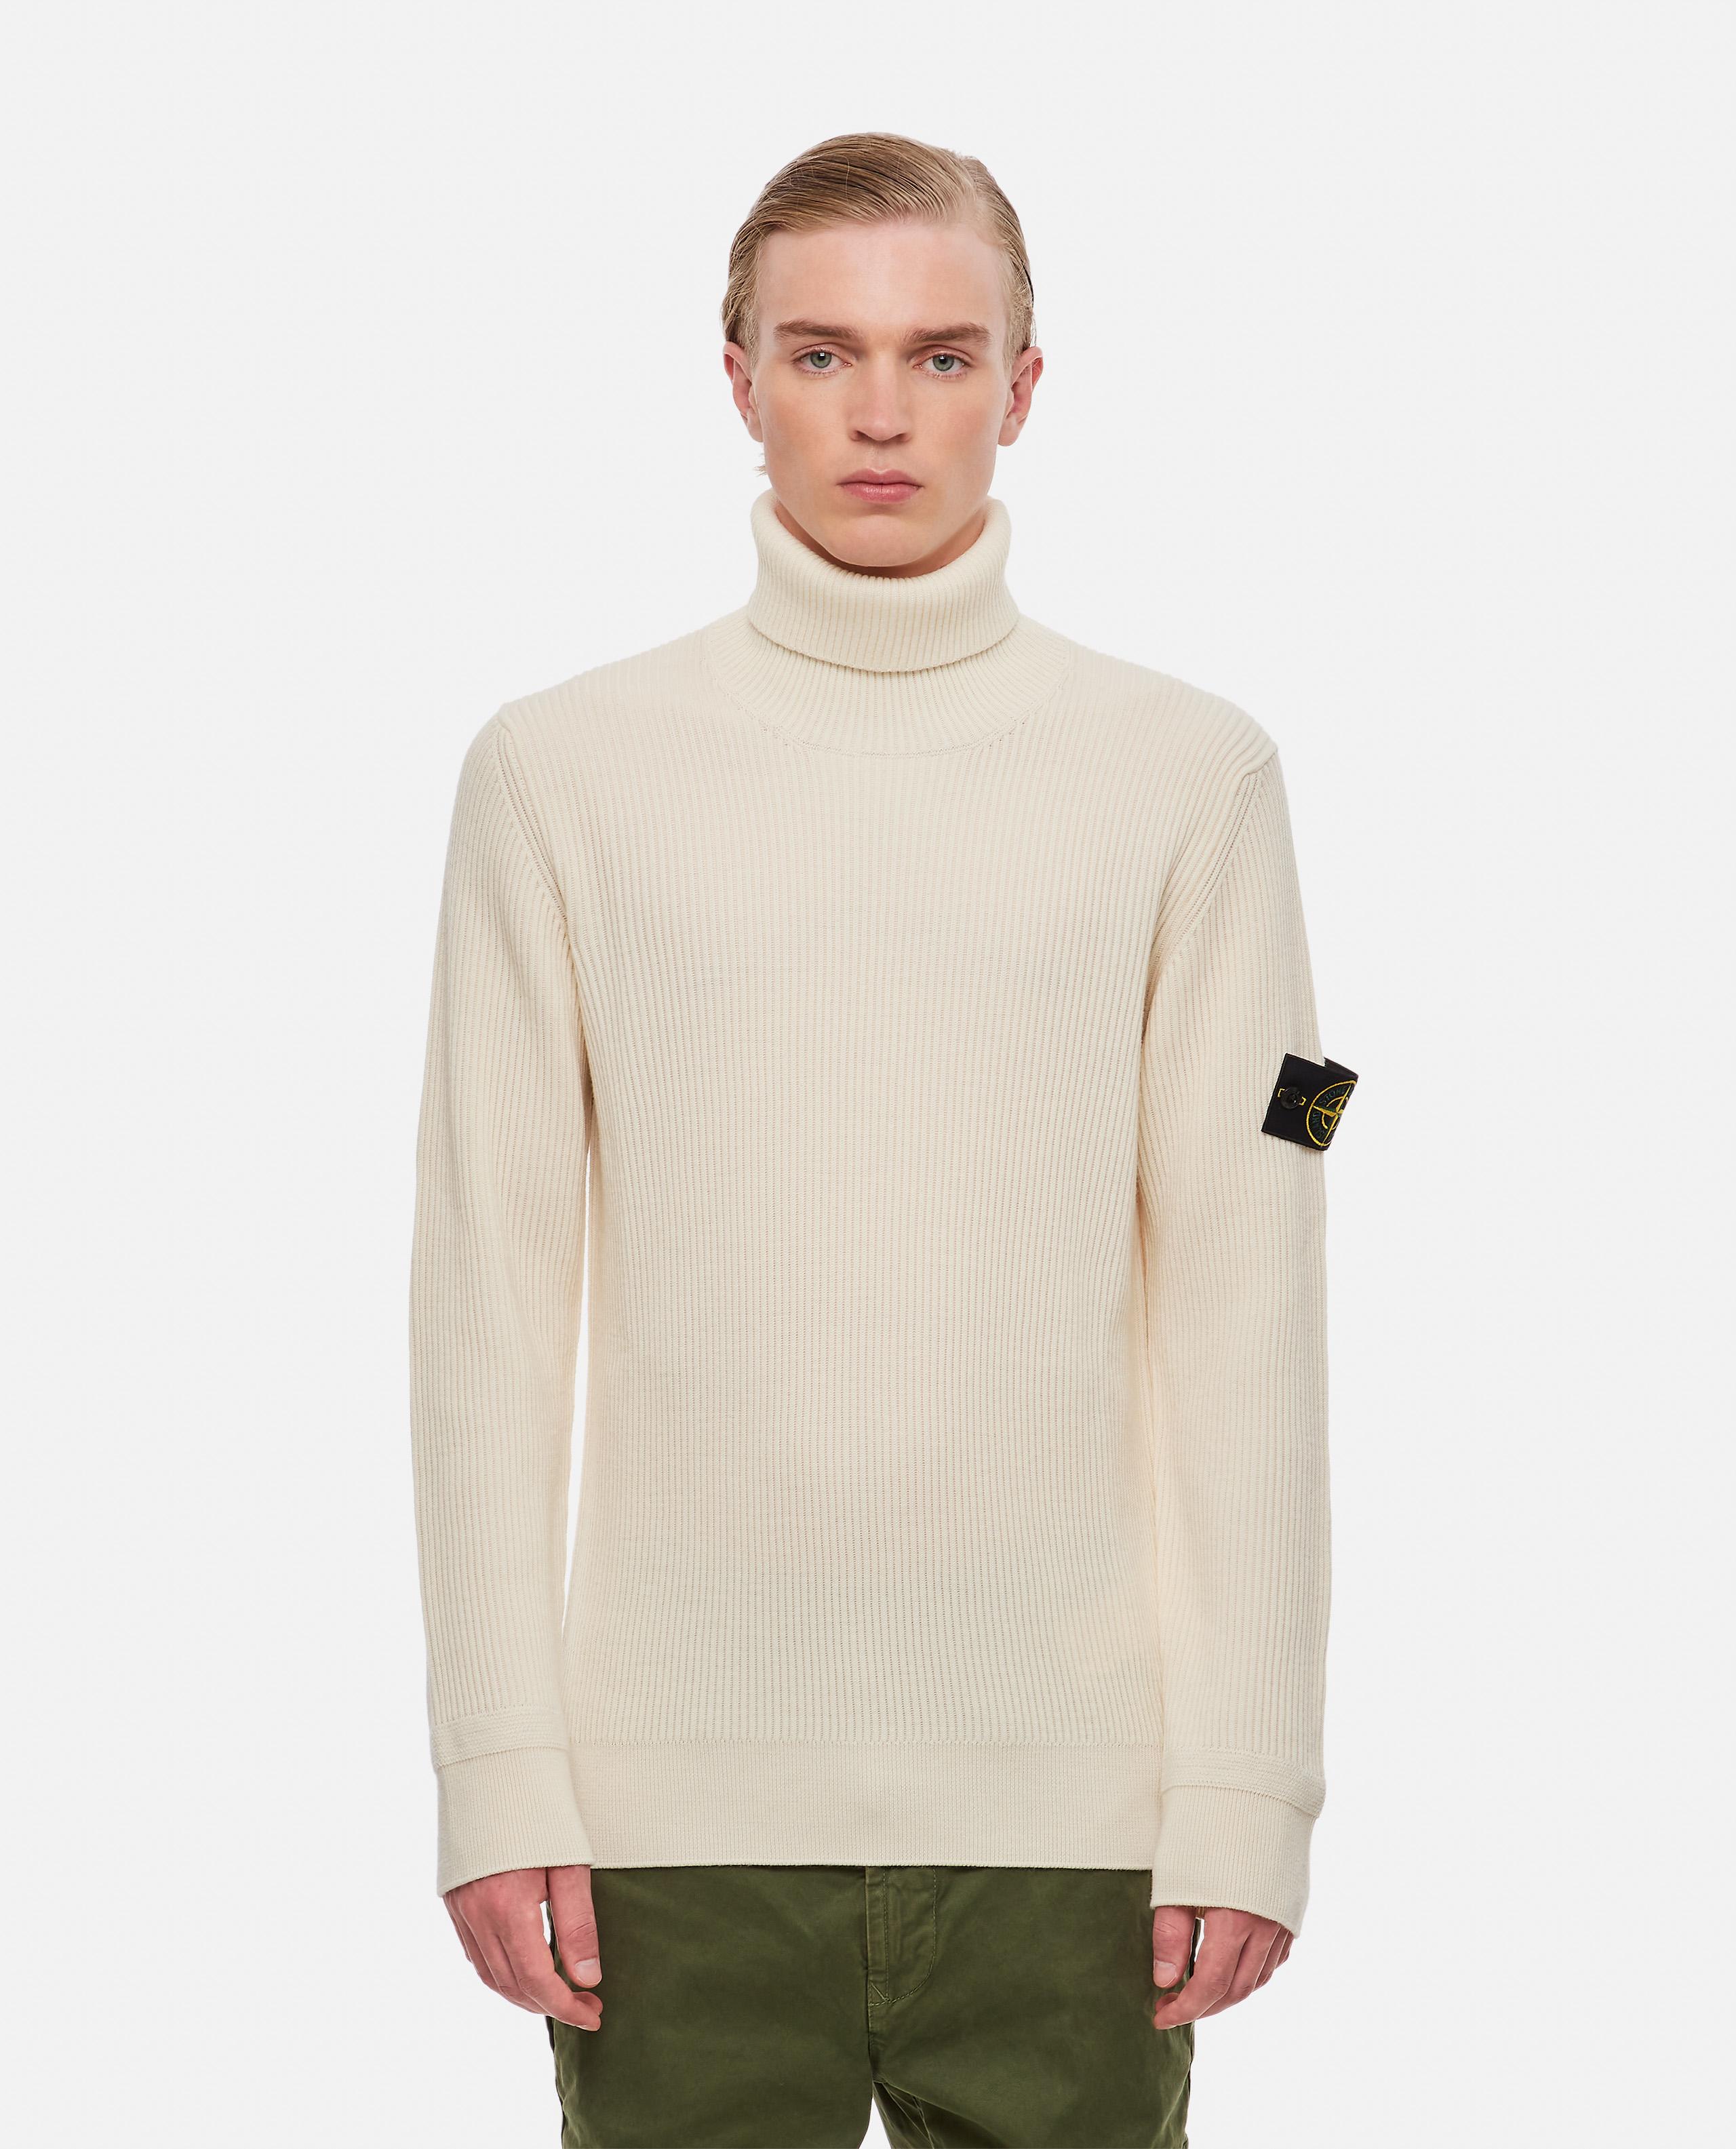 Stone Island Wool Turtleneck in Natural for Men | Lyst